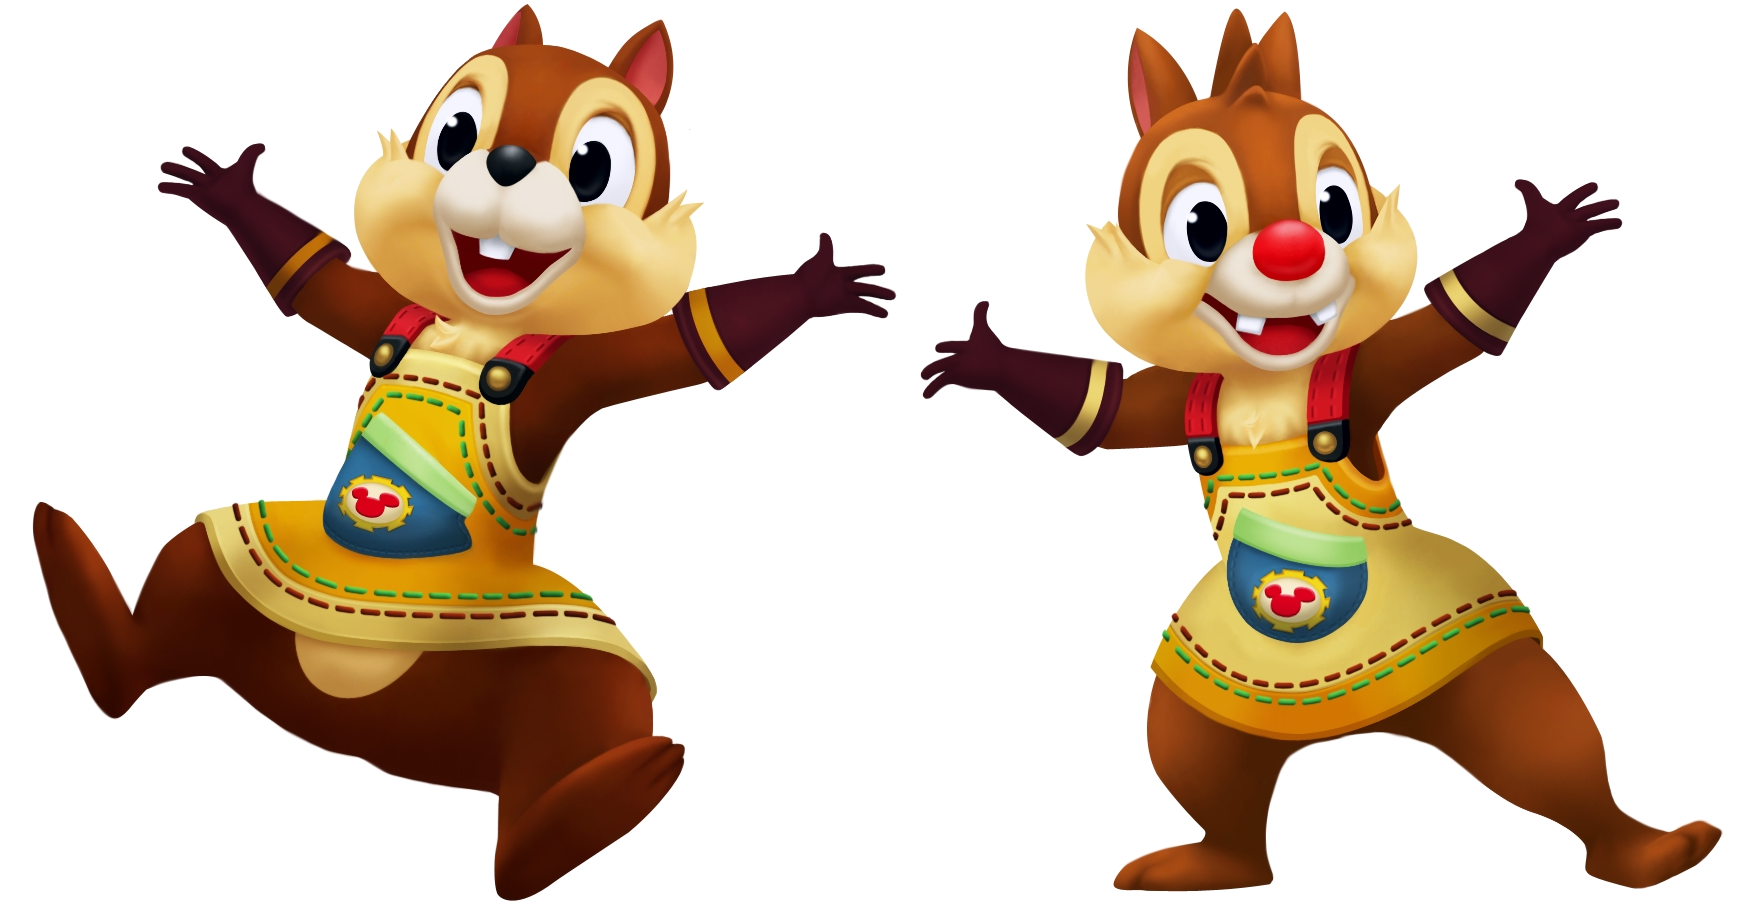 Chip and dale wallpaper. Clipart squirrel mascot